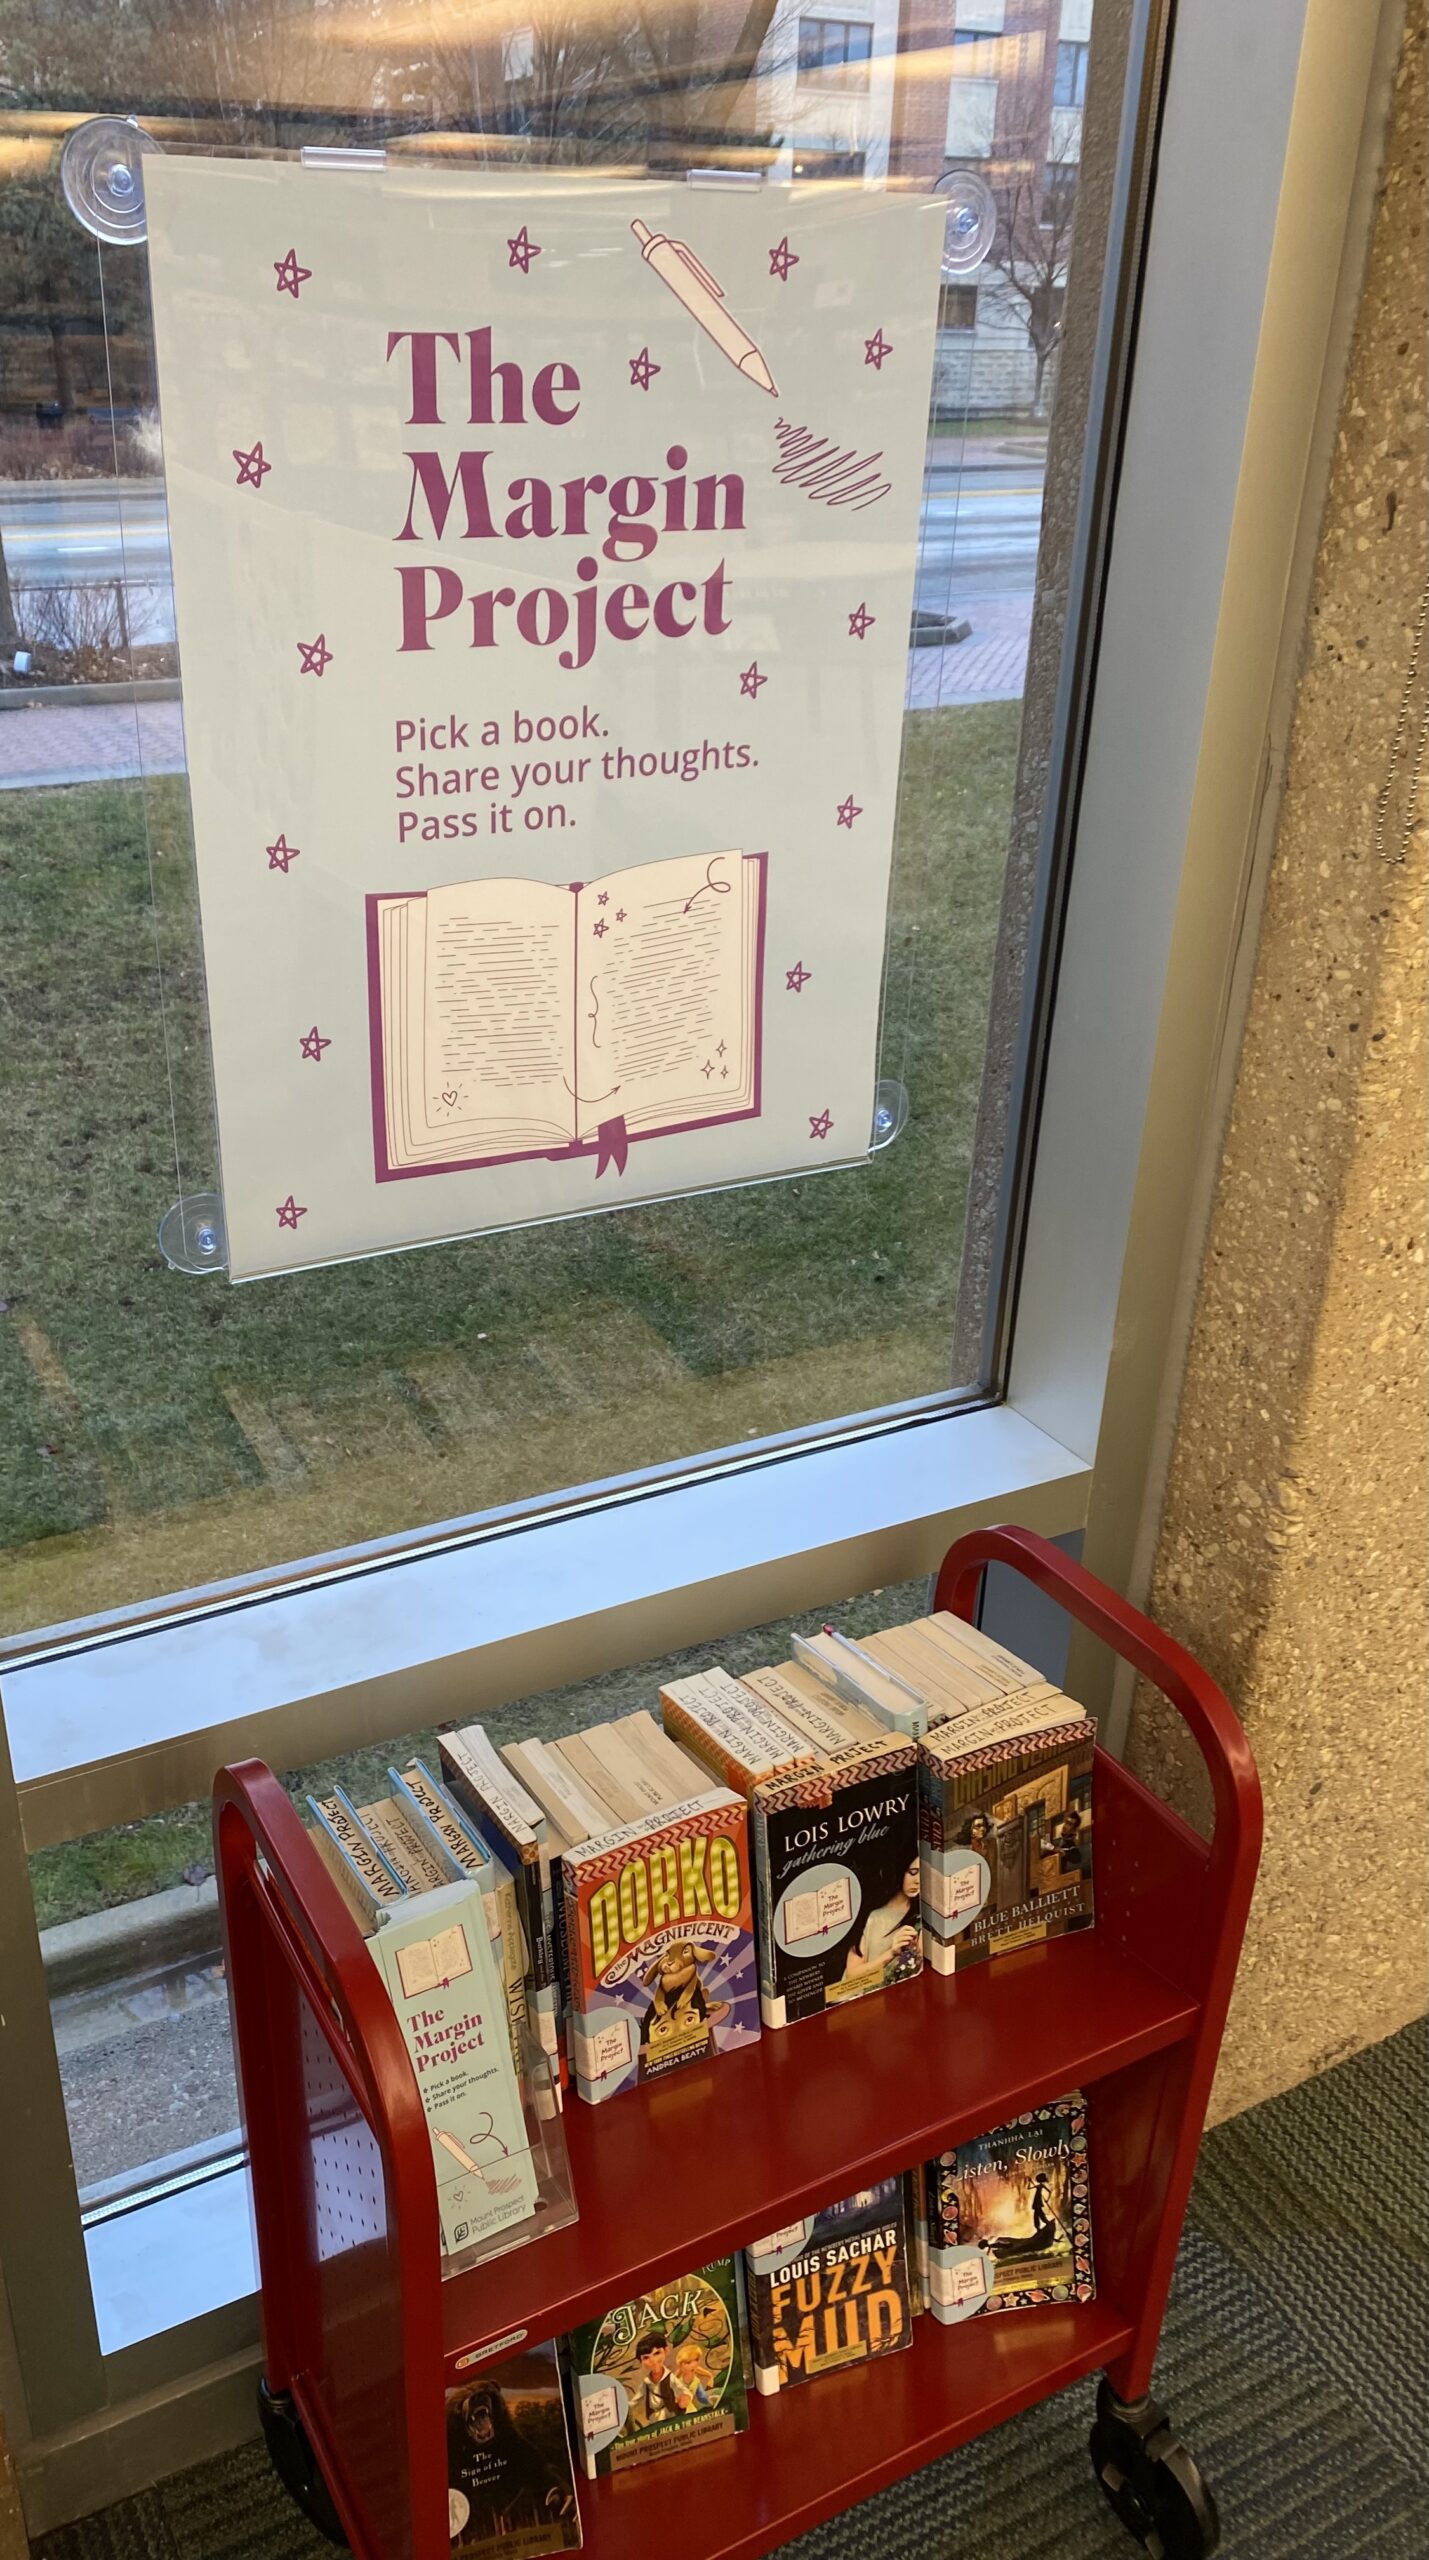 The Margin Project cart by the window.